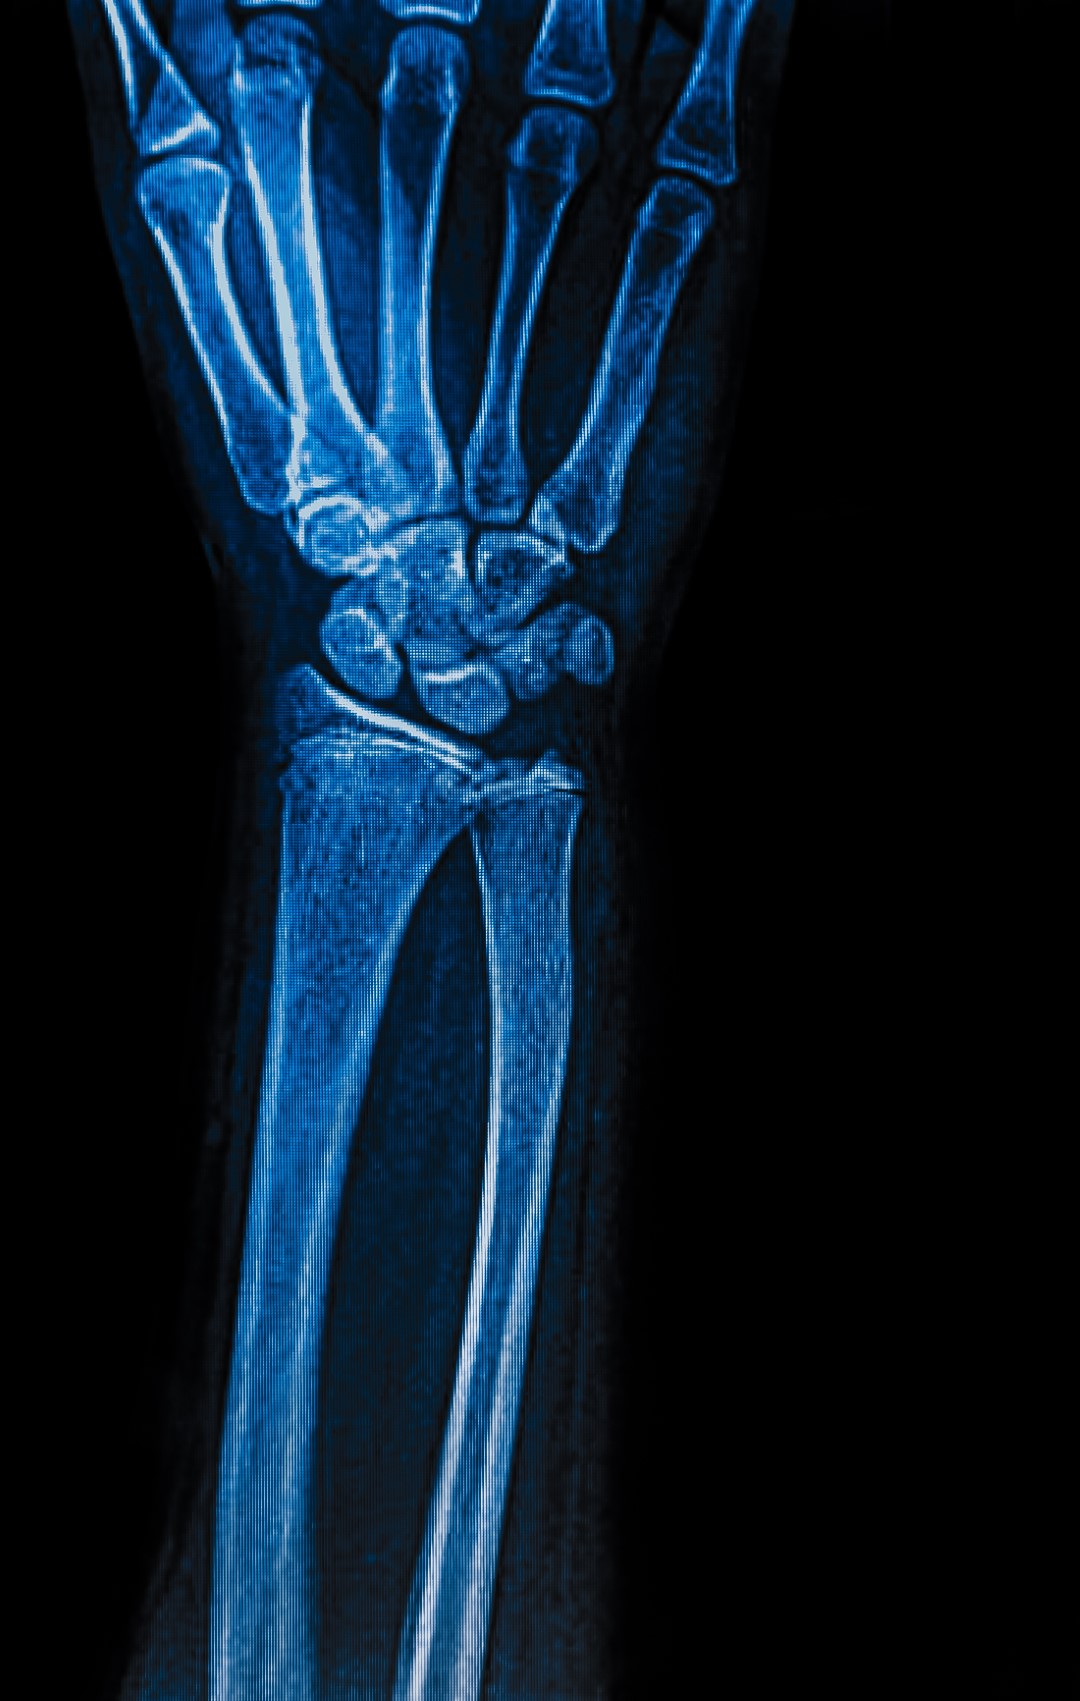 An X-ray image of a wrist is highlighted in blue.